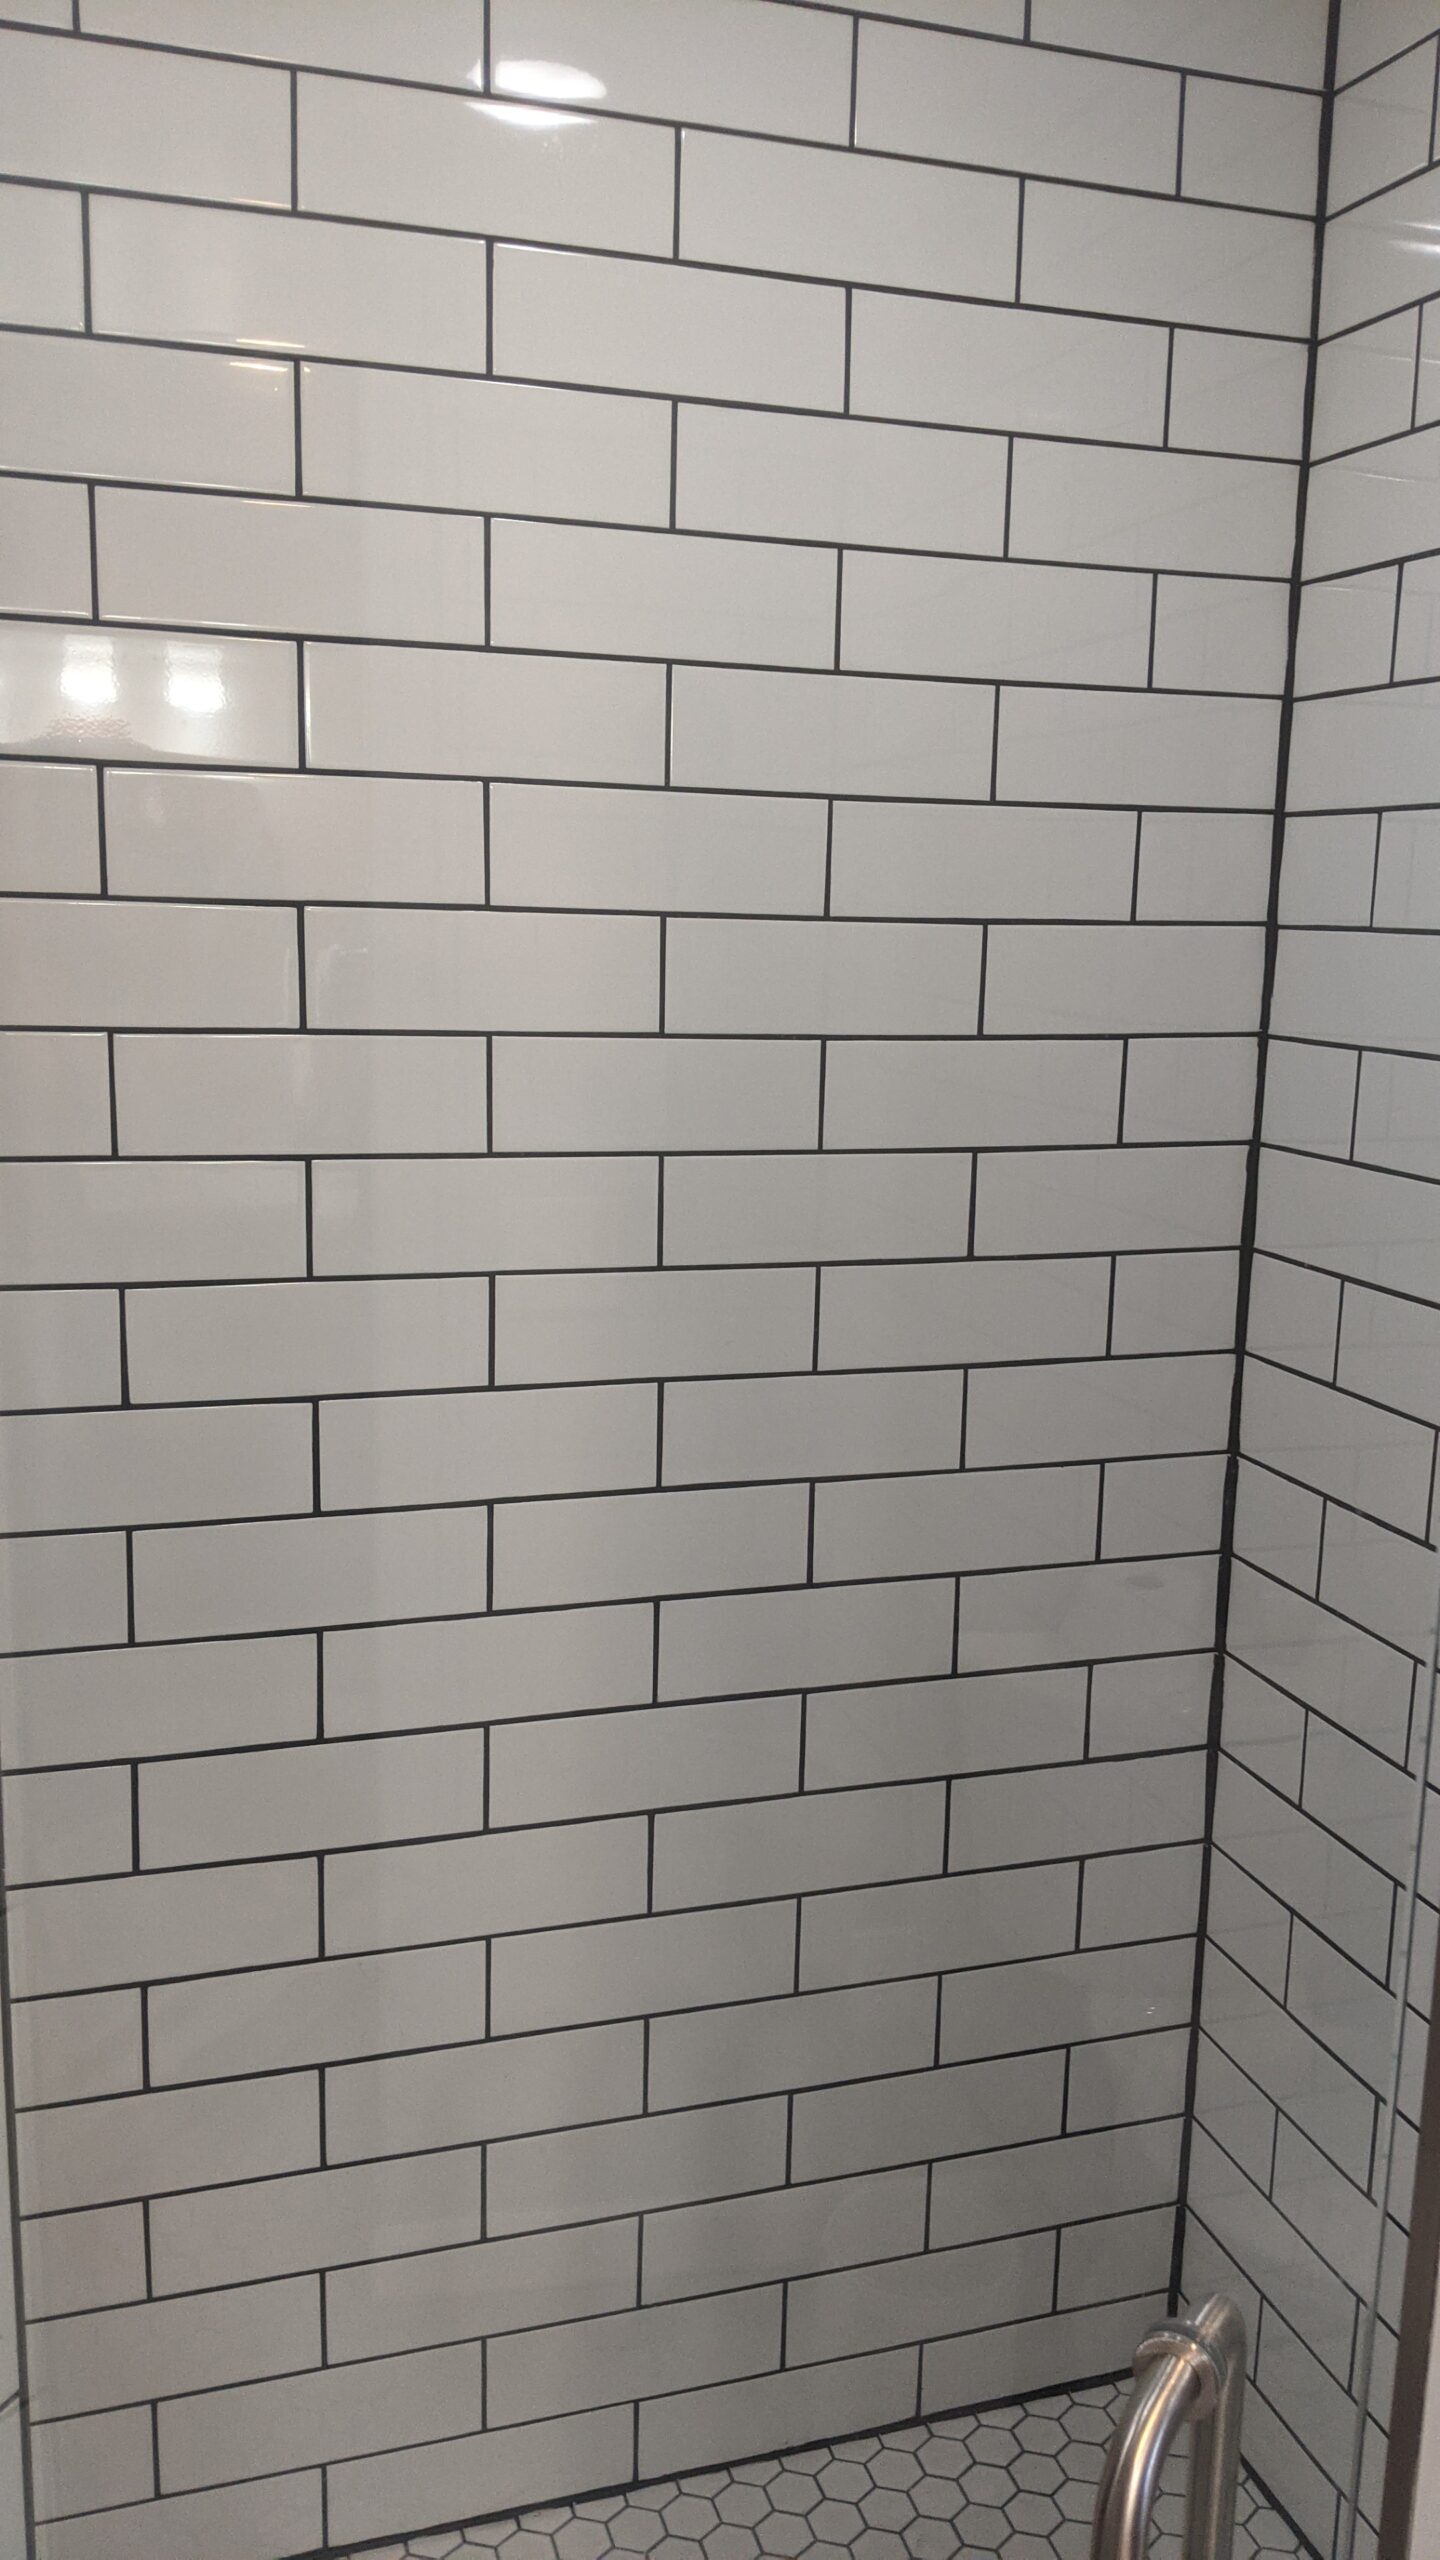 Picture of the modern subway tile shower.